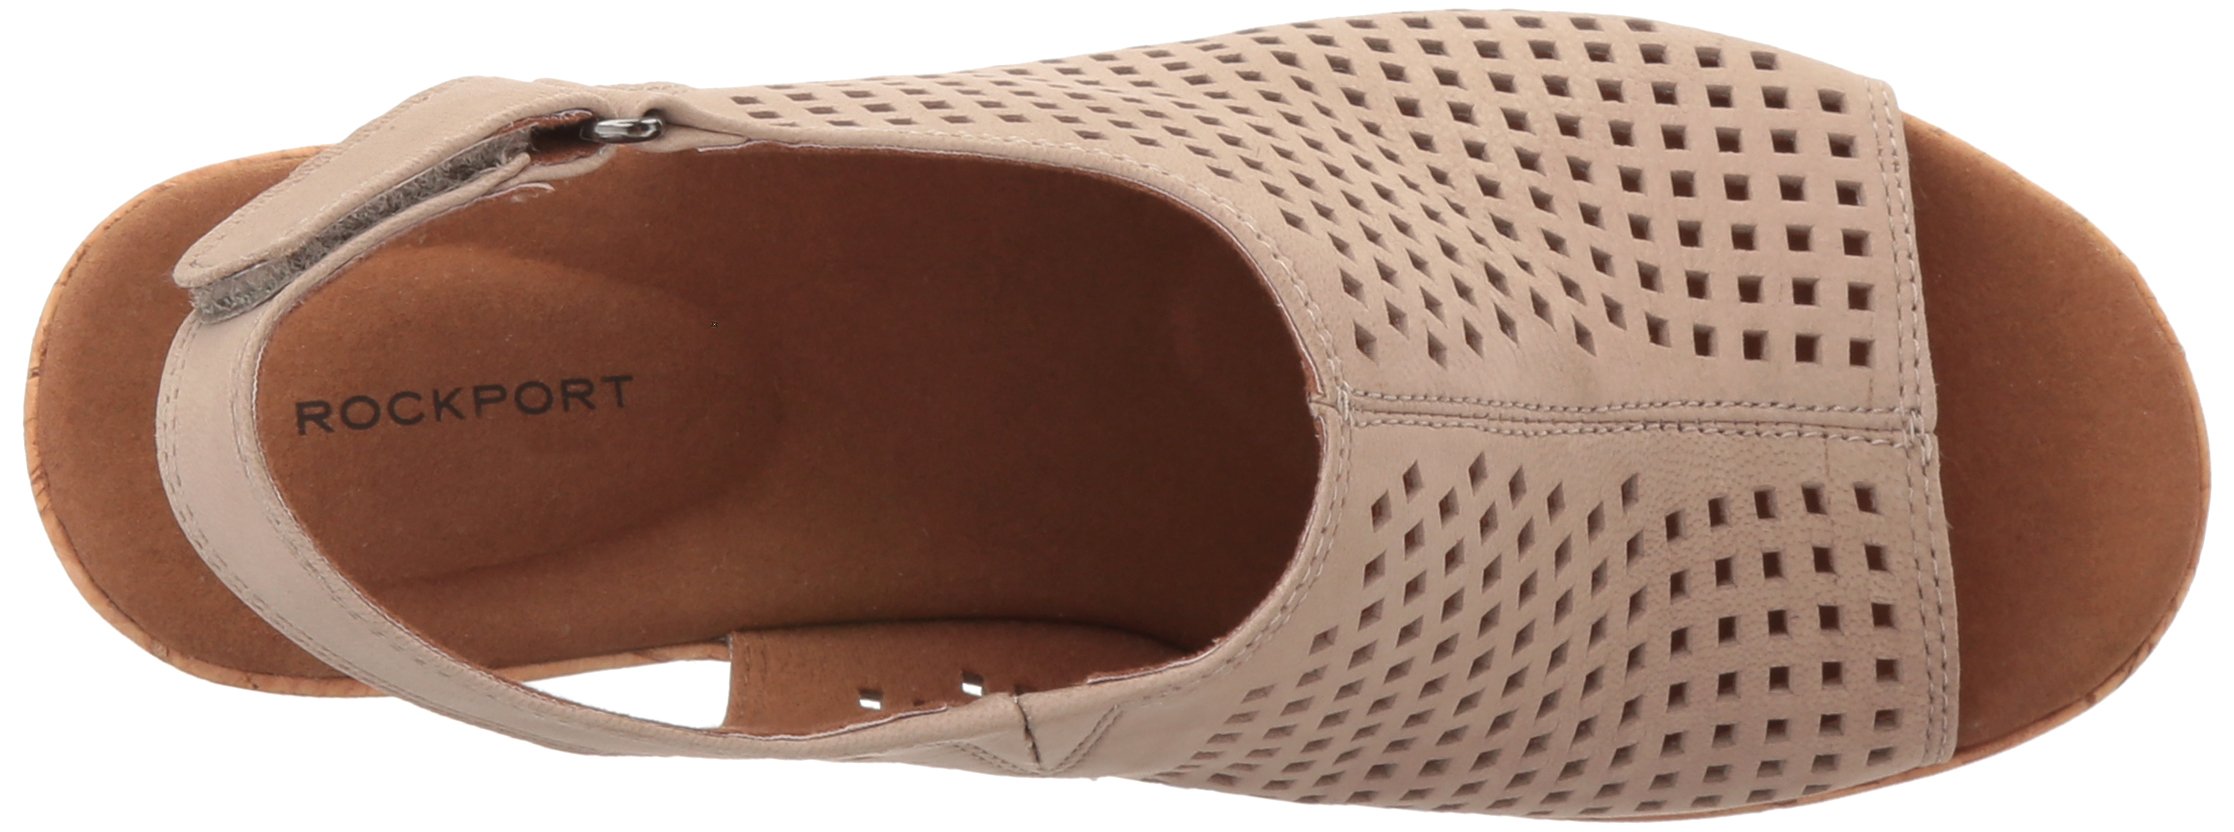 Rockport Women's Briah PERF Sling Wedge Sandal, taupe leather, 5 M US